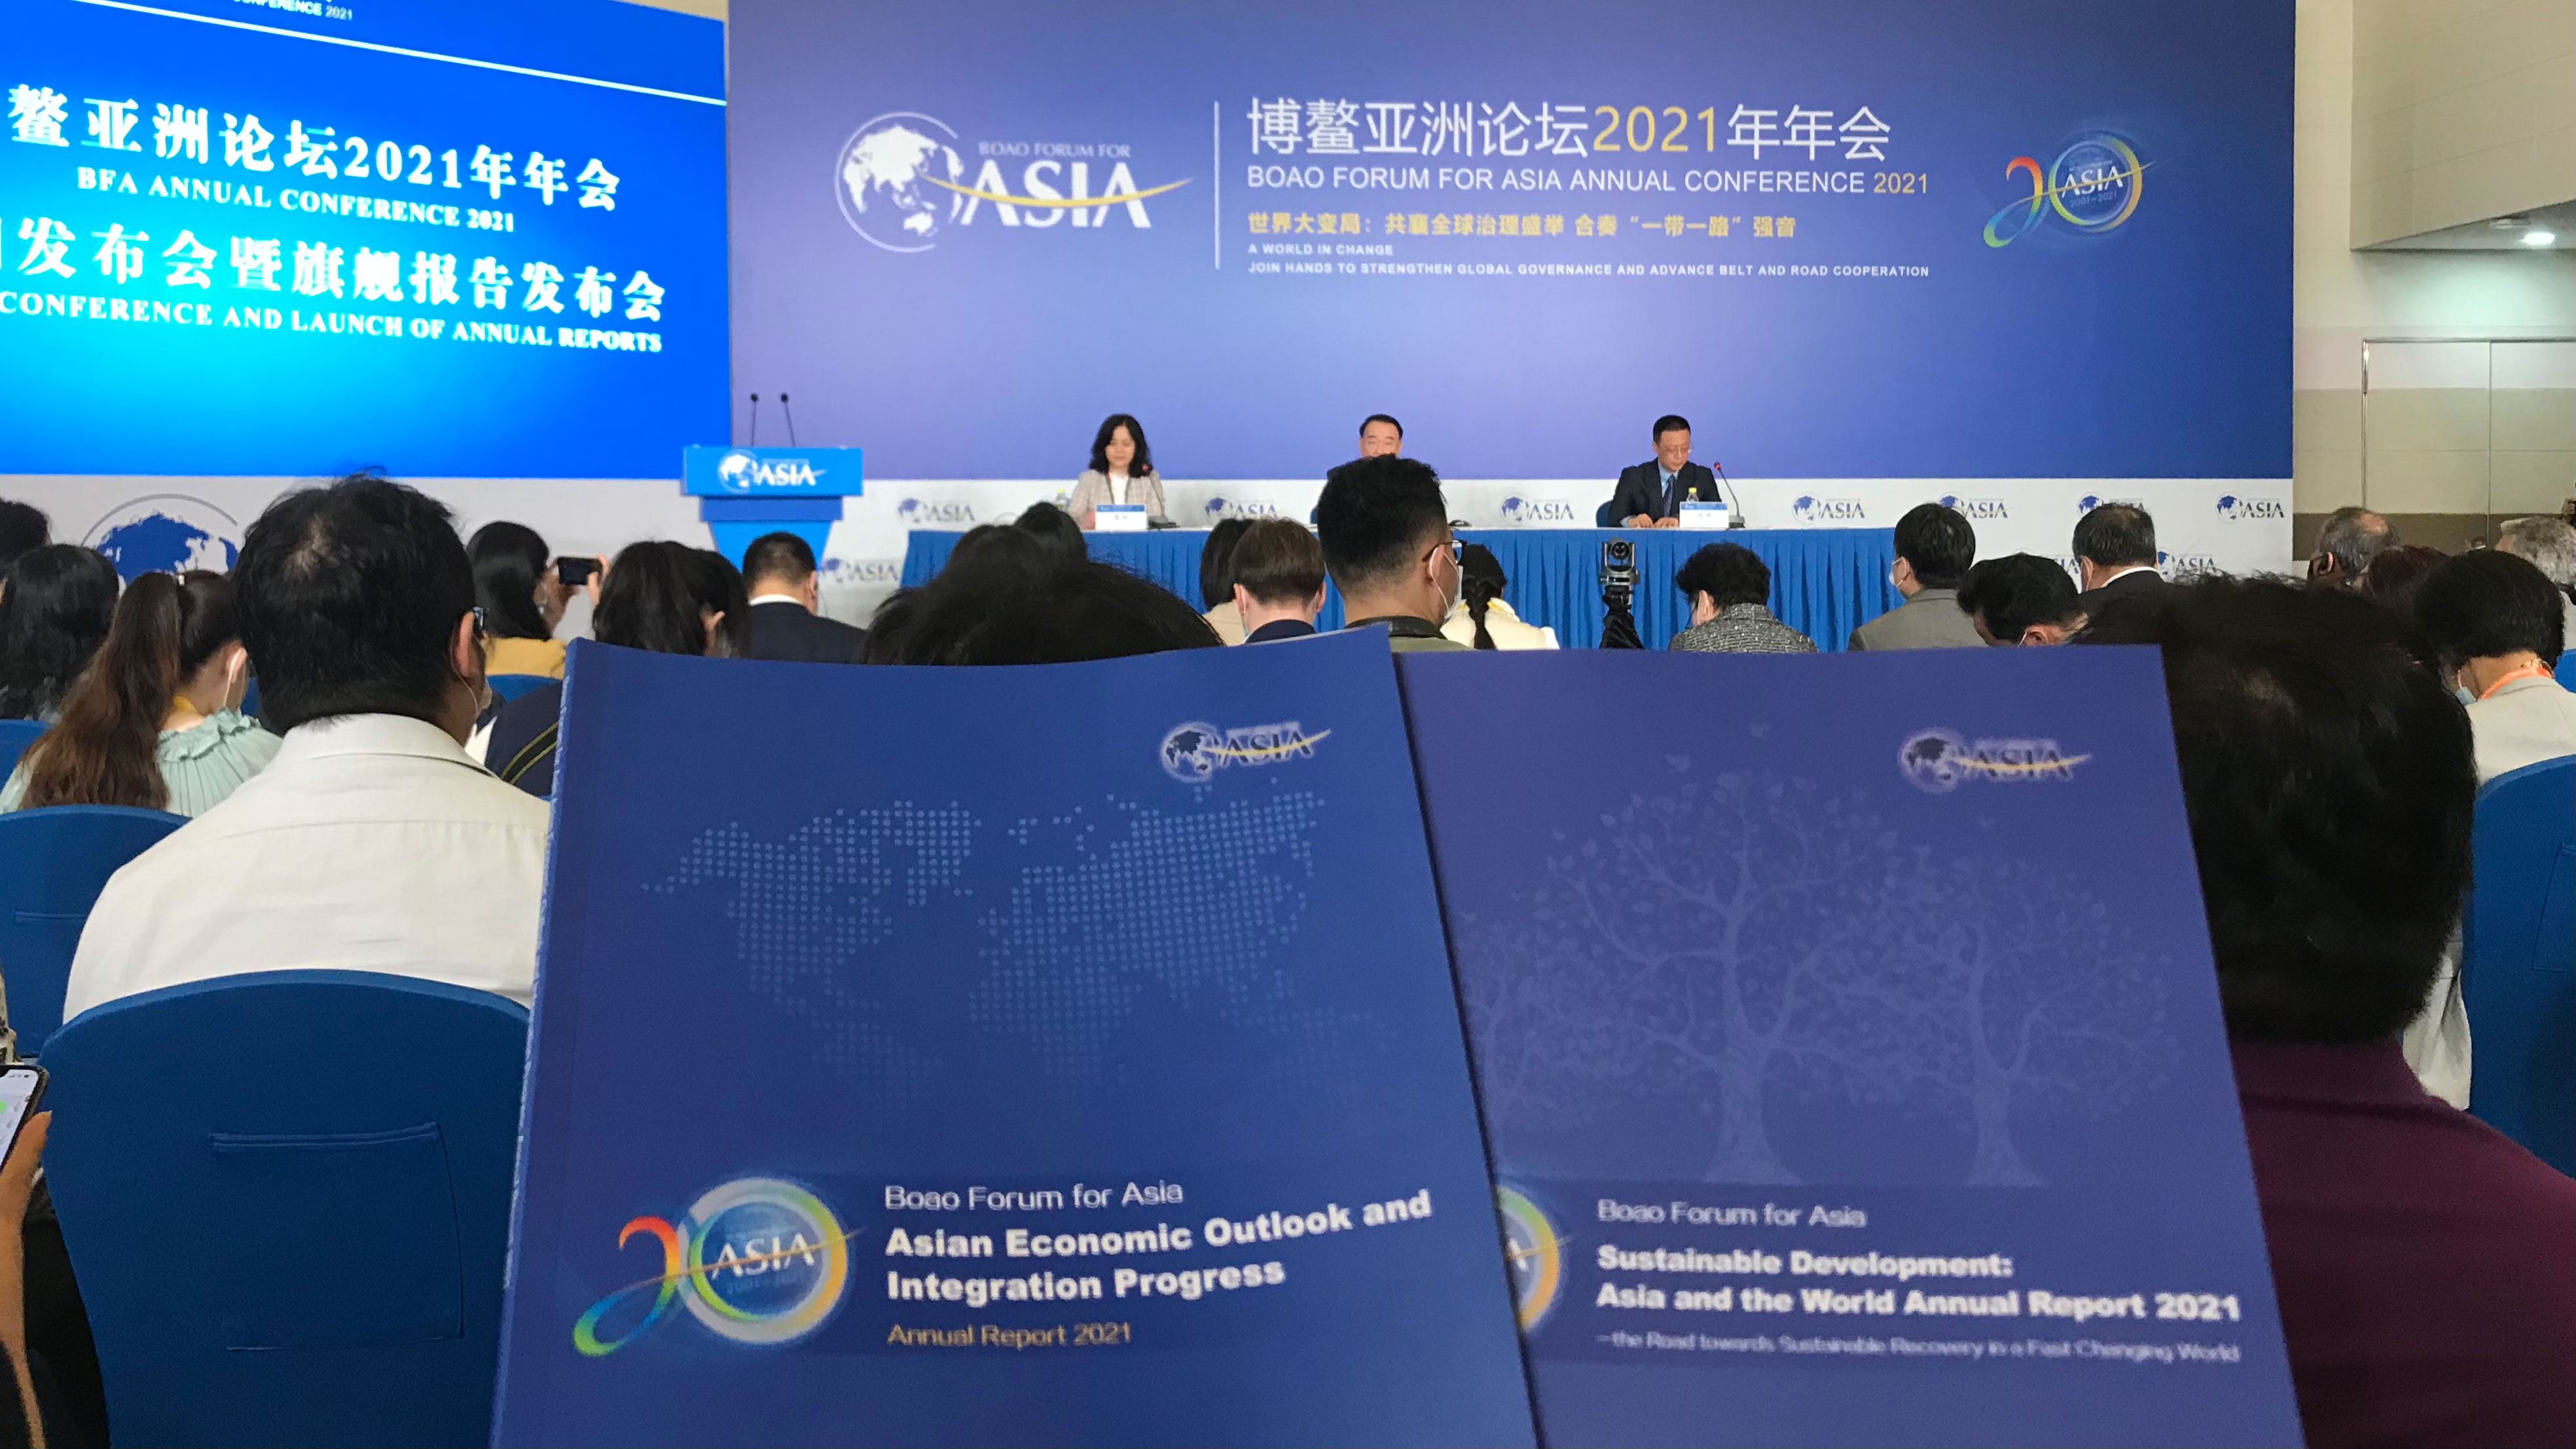 Asian economies should brace for opportunities and handle deficits: Boao annual reports